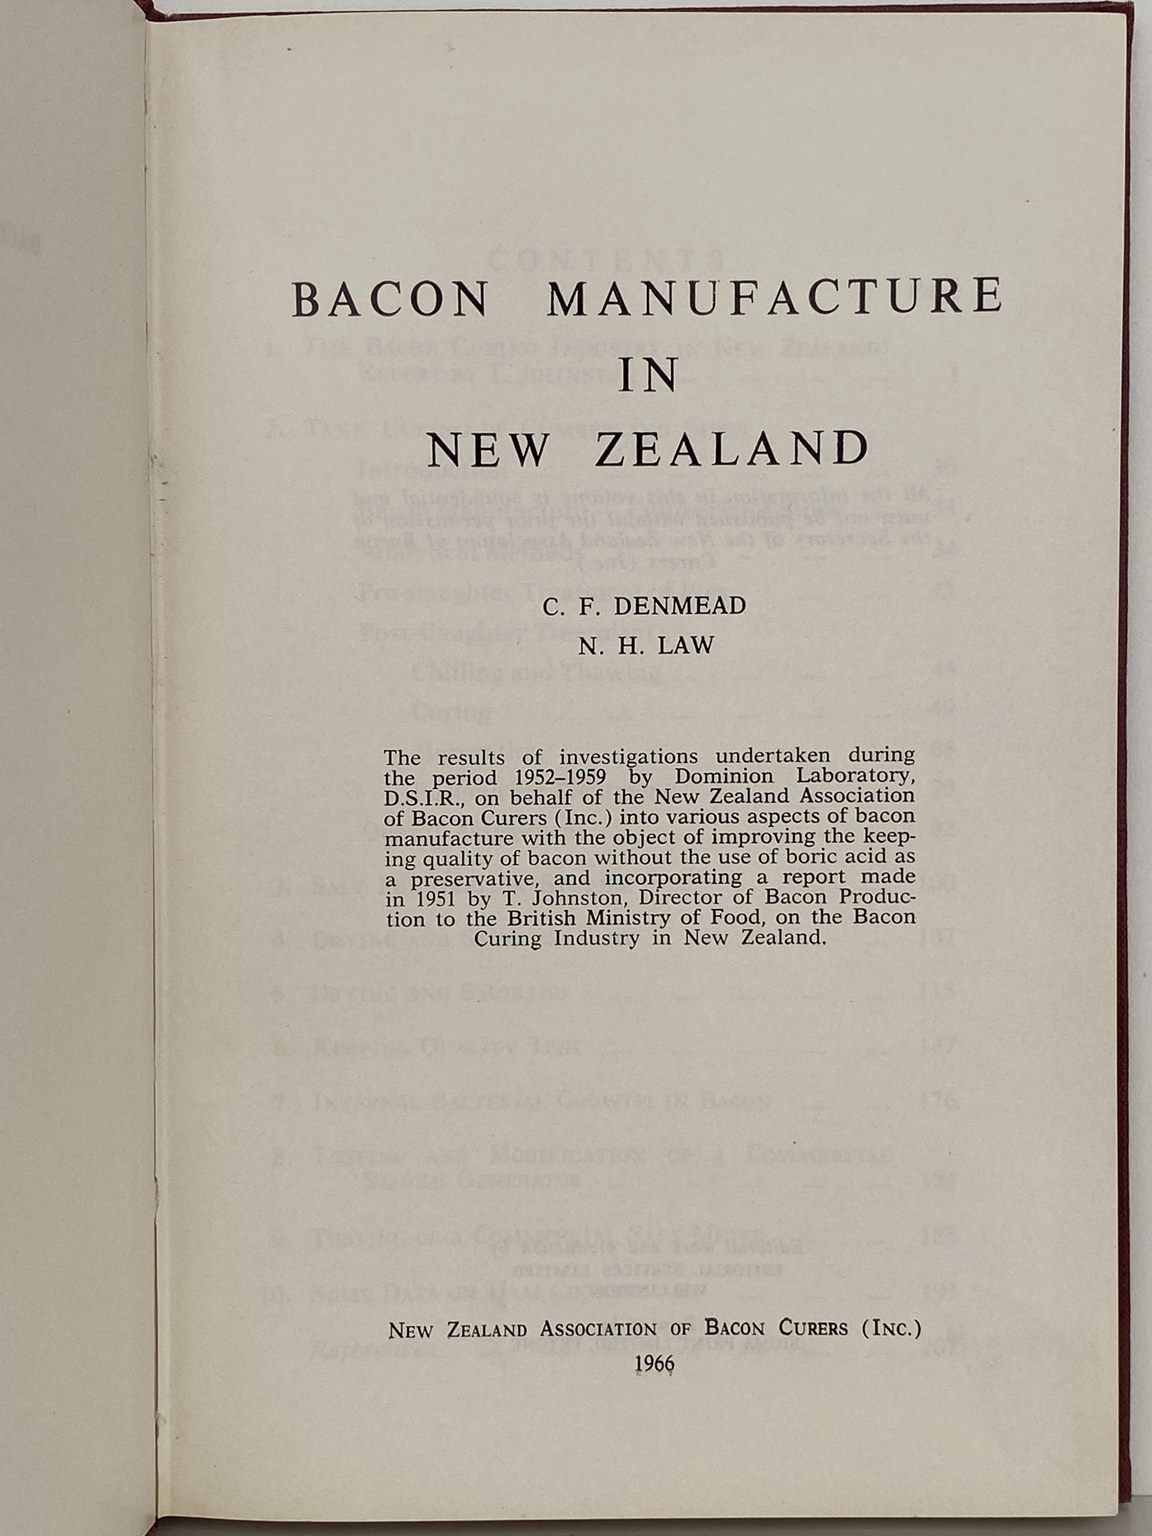 BACON MANUFACTURE IN NEW ZEALAND